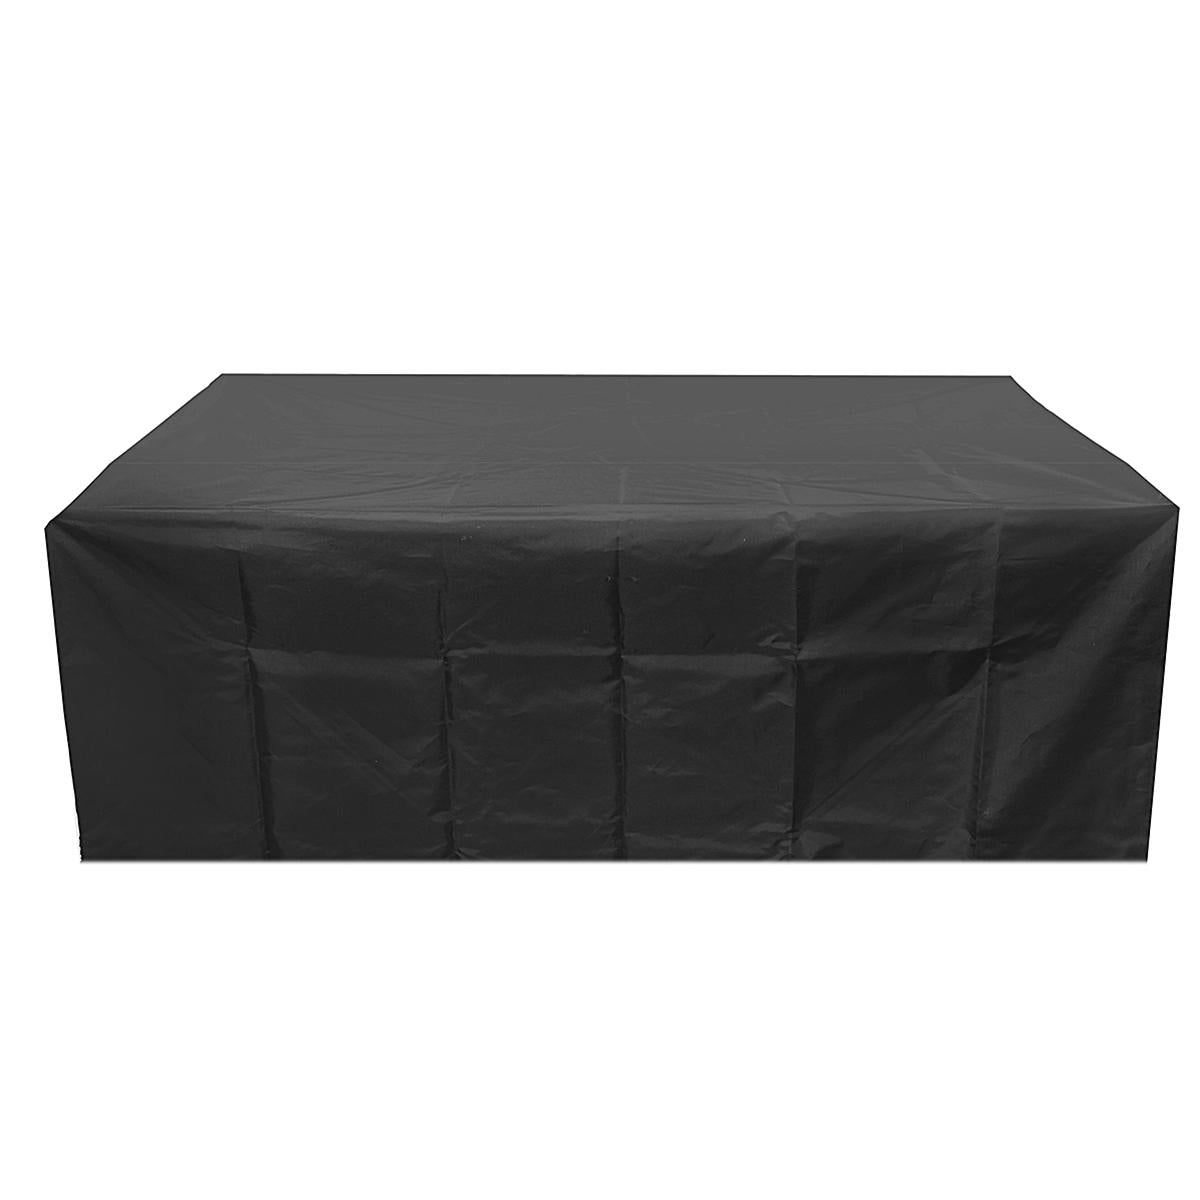 270x180x89CM Garden Patio Furniture Dust Cover Waterproof Oxford Outdoor Rattan Table Protection